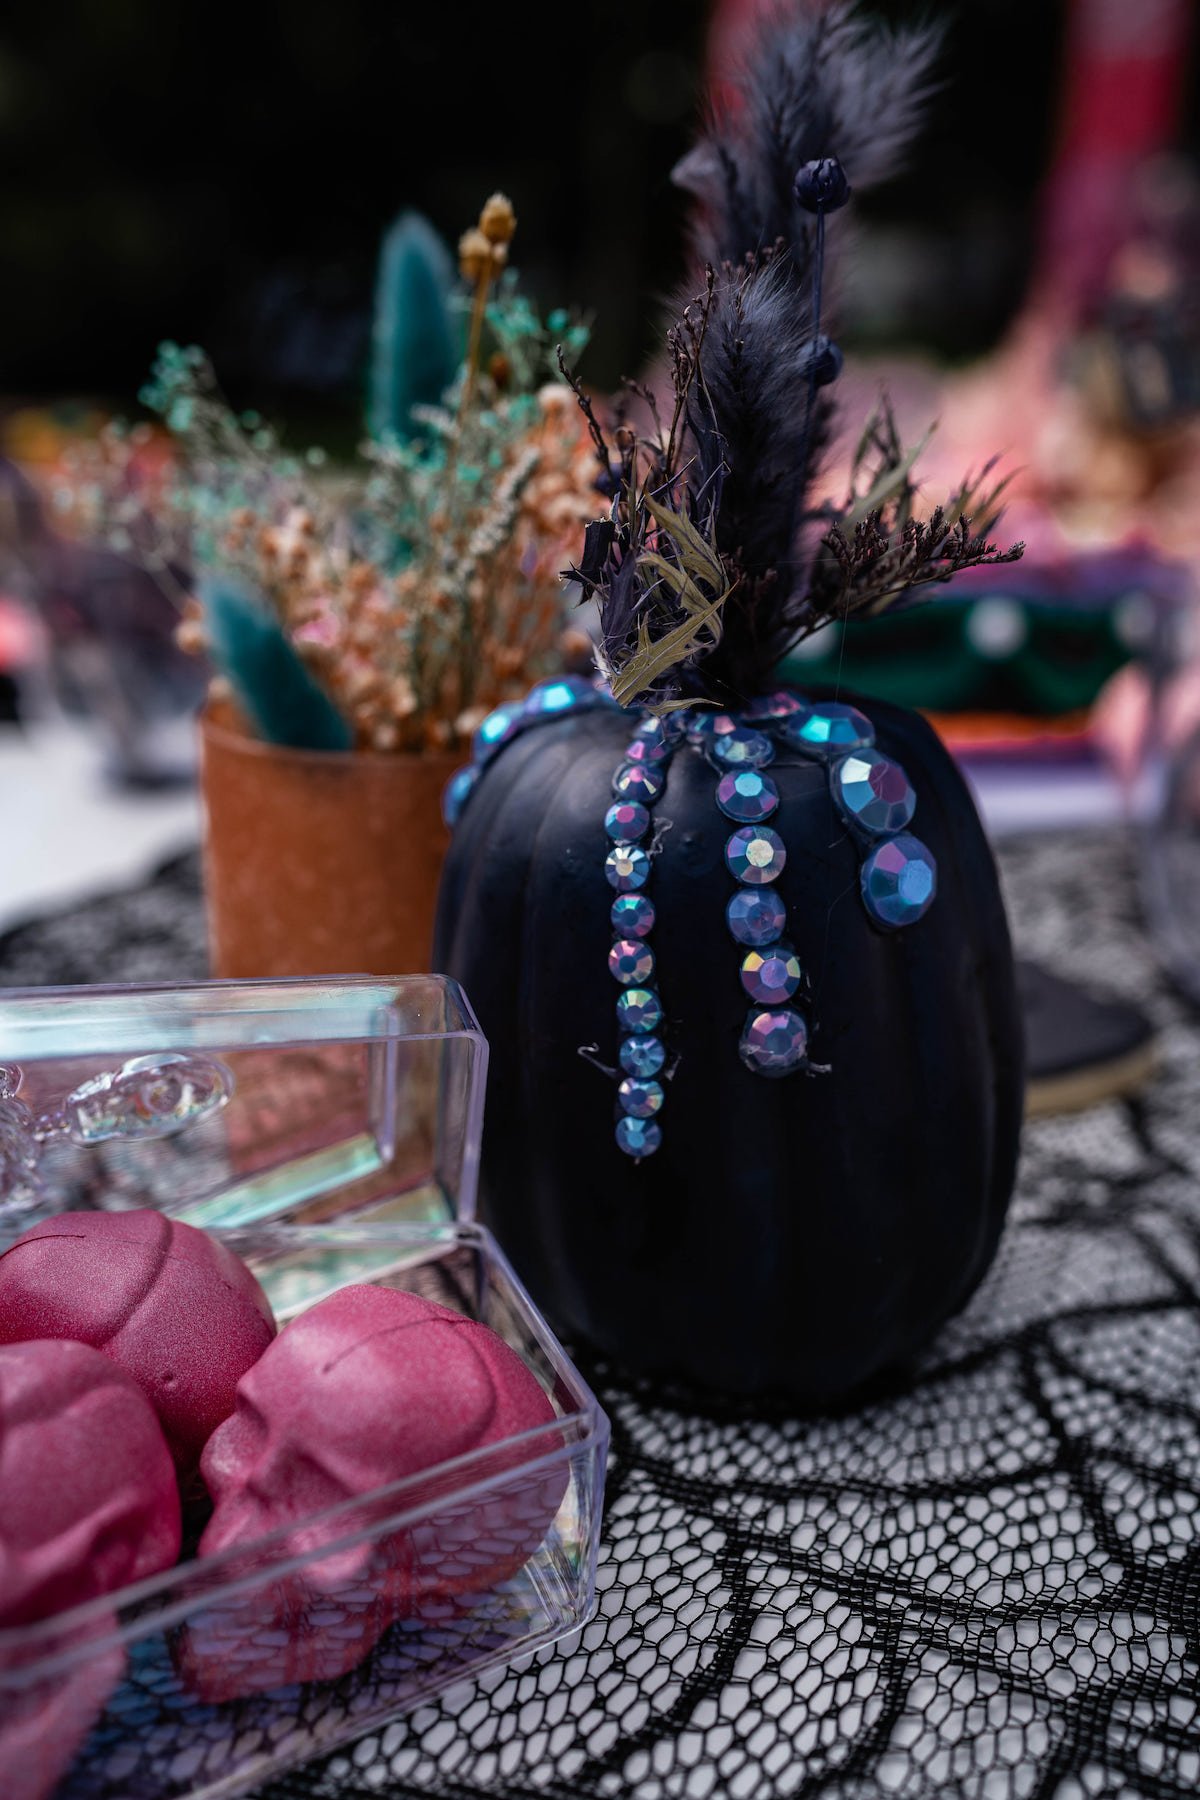 Black jeweled pumpkin party decoration and pink skull heads